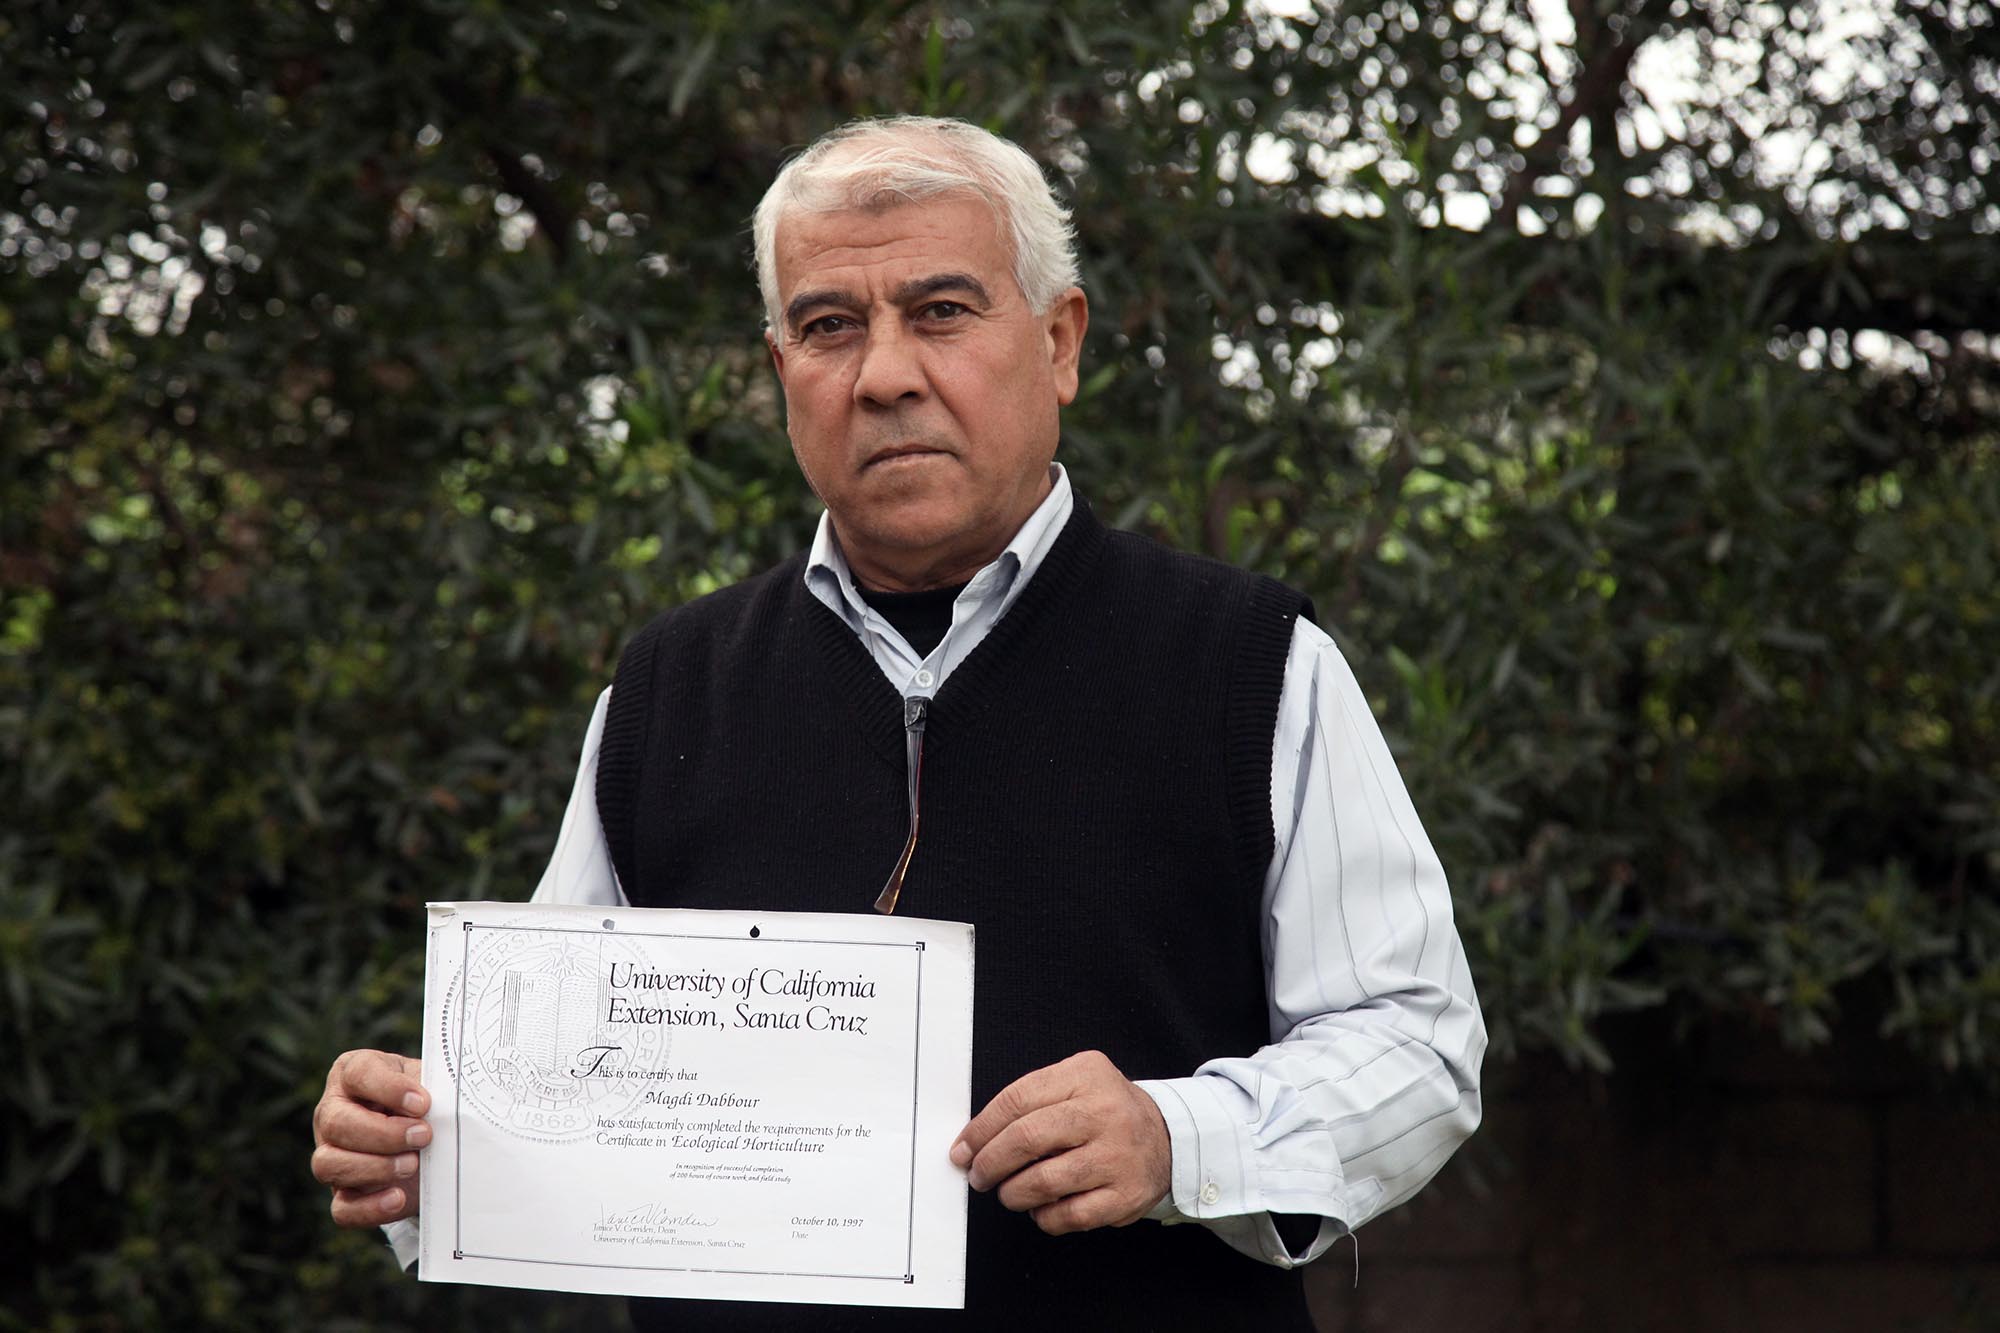 Magdi Dabour has been advocating for organic farming in Gaza since 1997